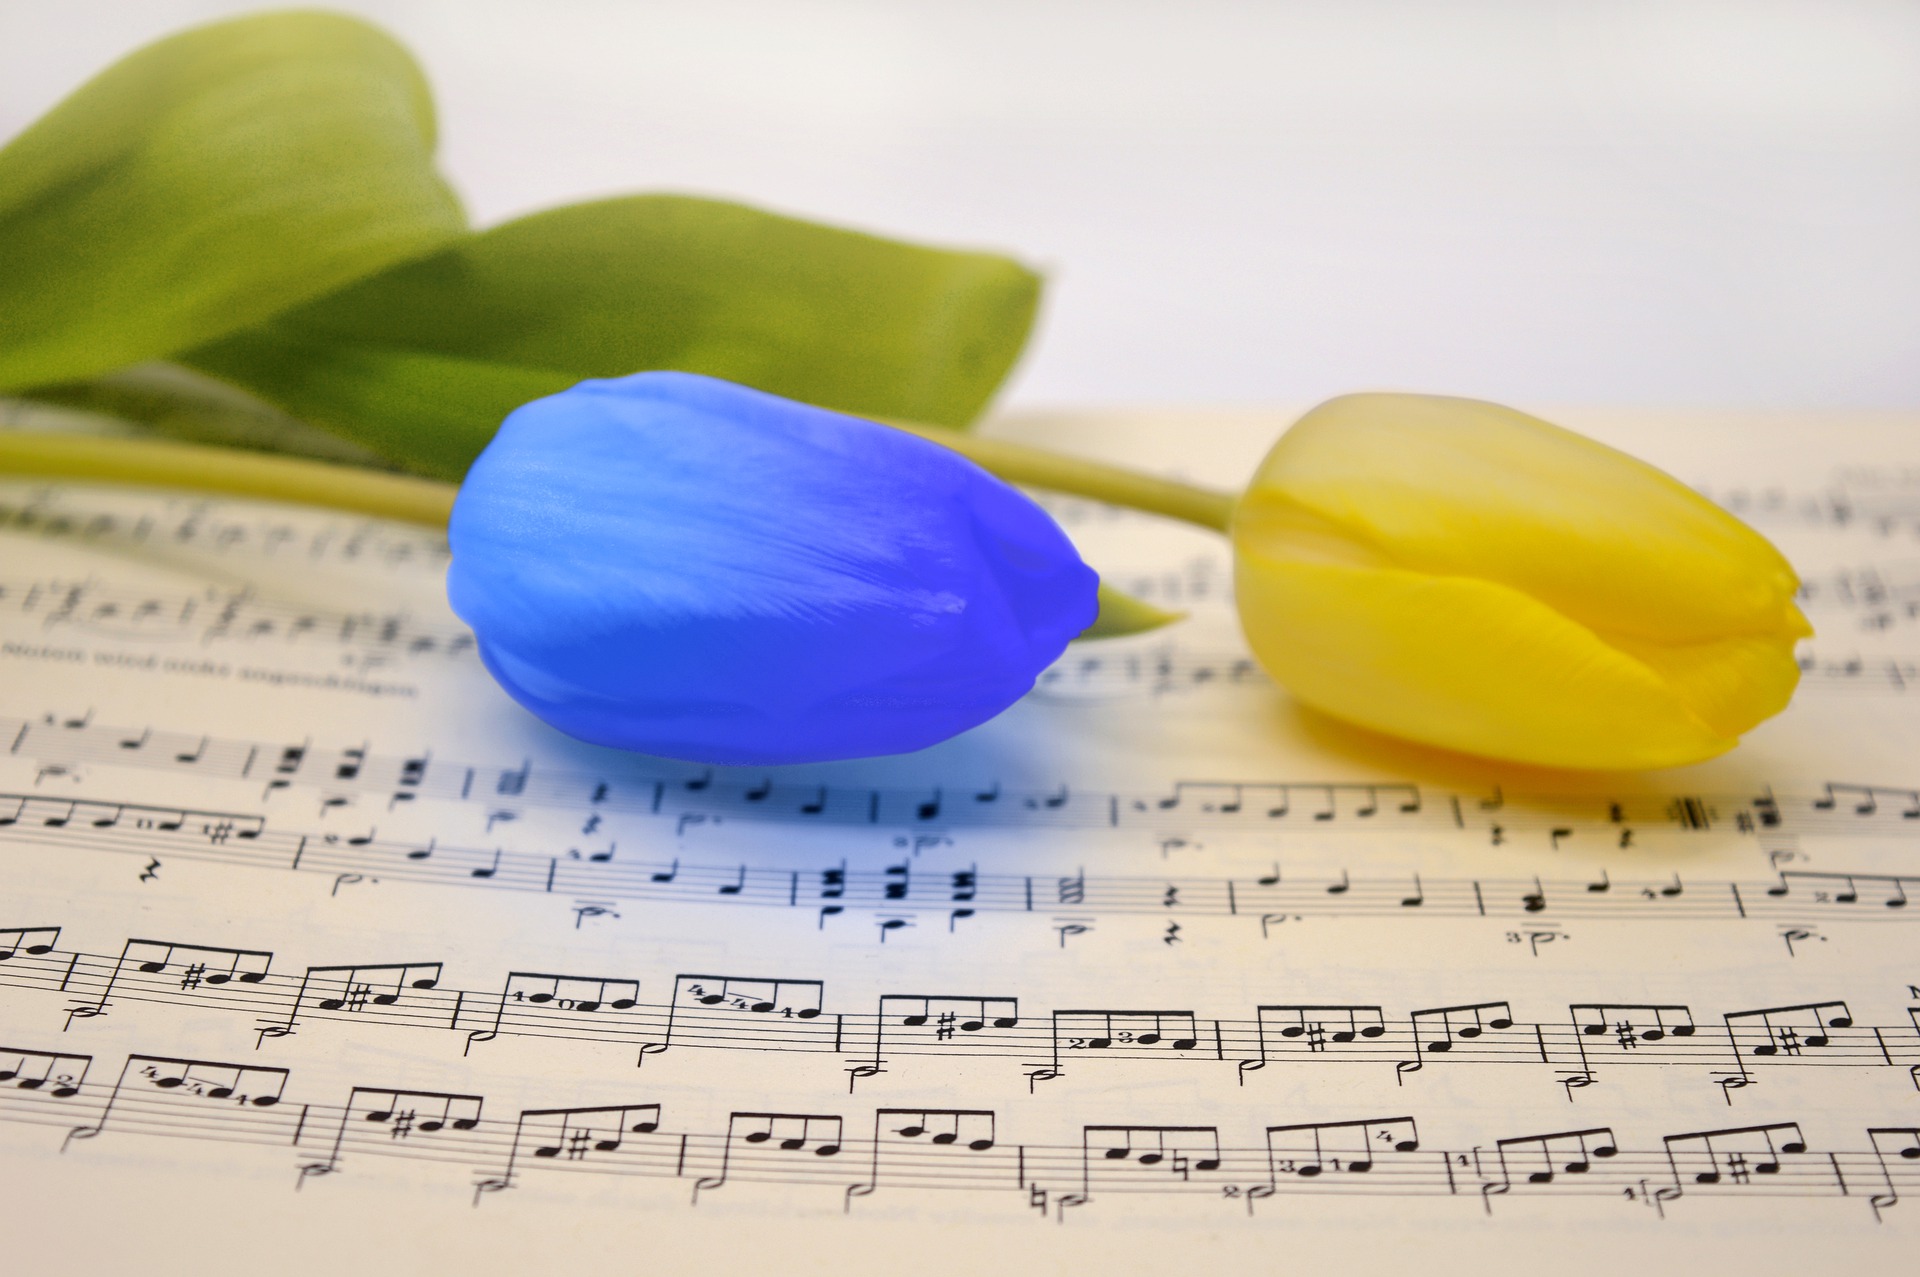 A photo featuring a page of sheet music with one blue and one yellow tulip laying upon it.